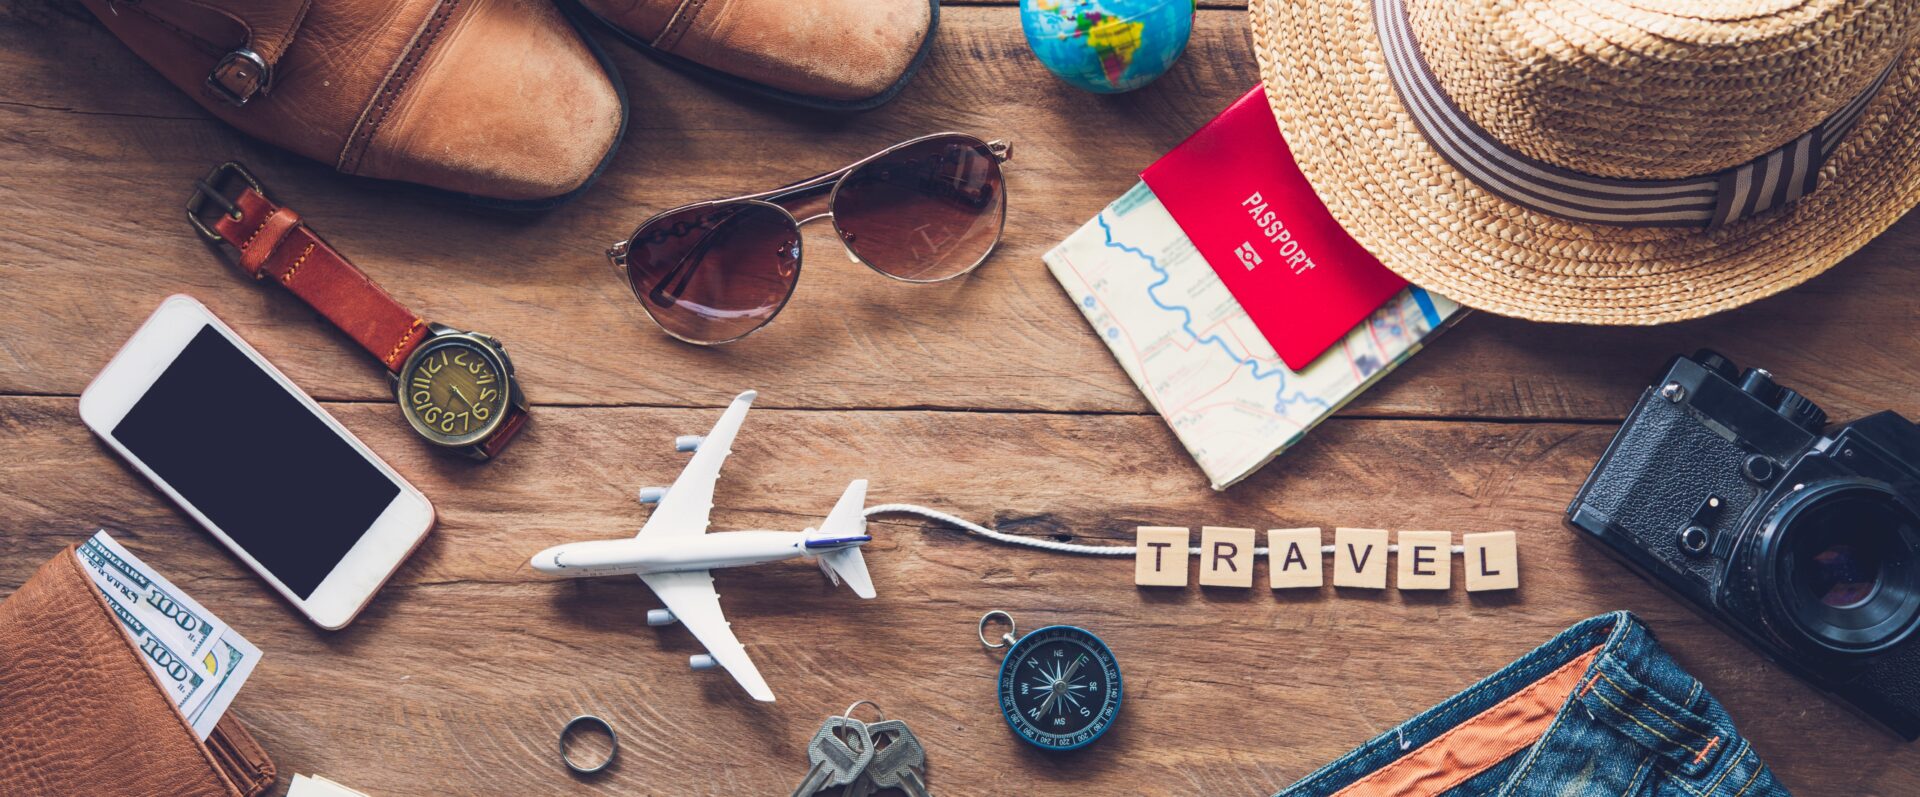 Essentials for your travel journey: passport, watch , cell phone, sunglasses, camera, hat, wallet with money, shoes, a toy airplane pulling the letters T R A V E L